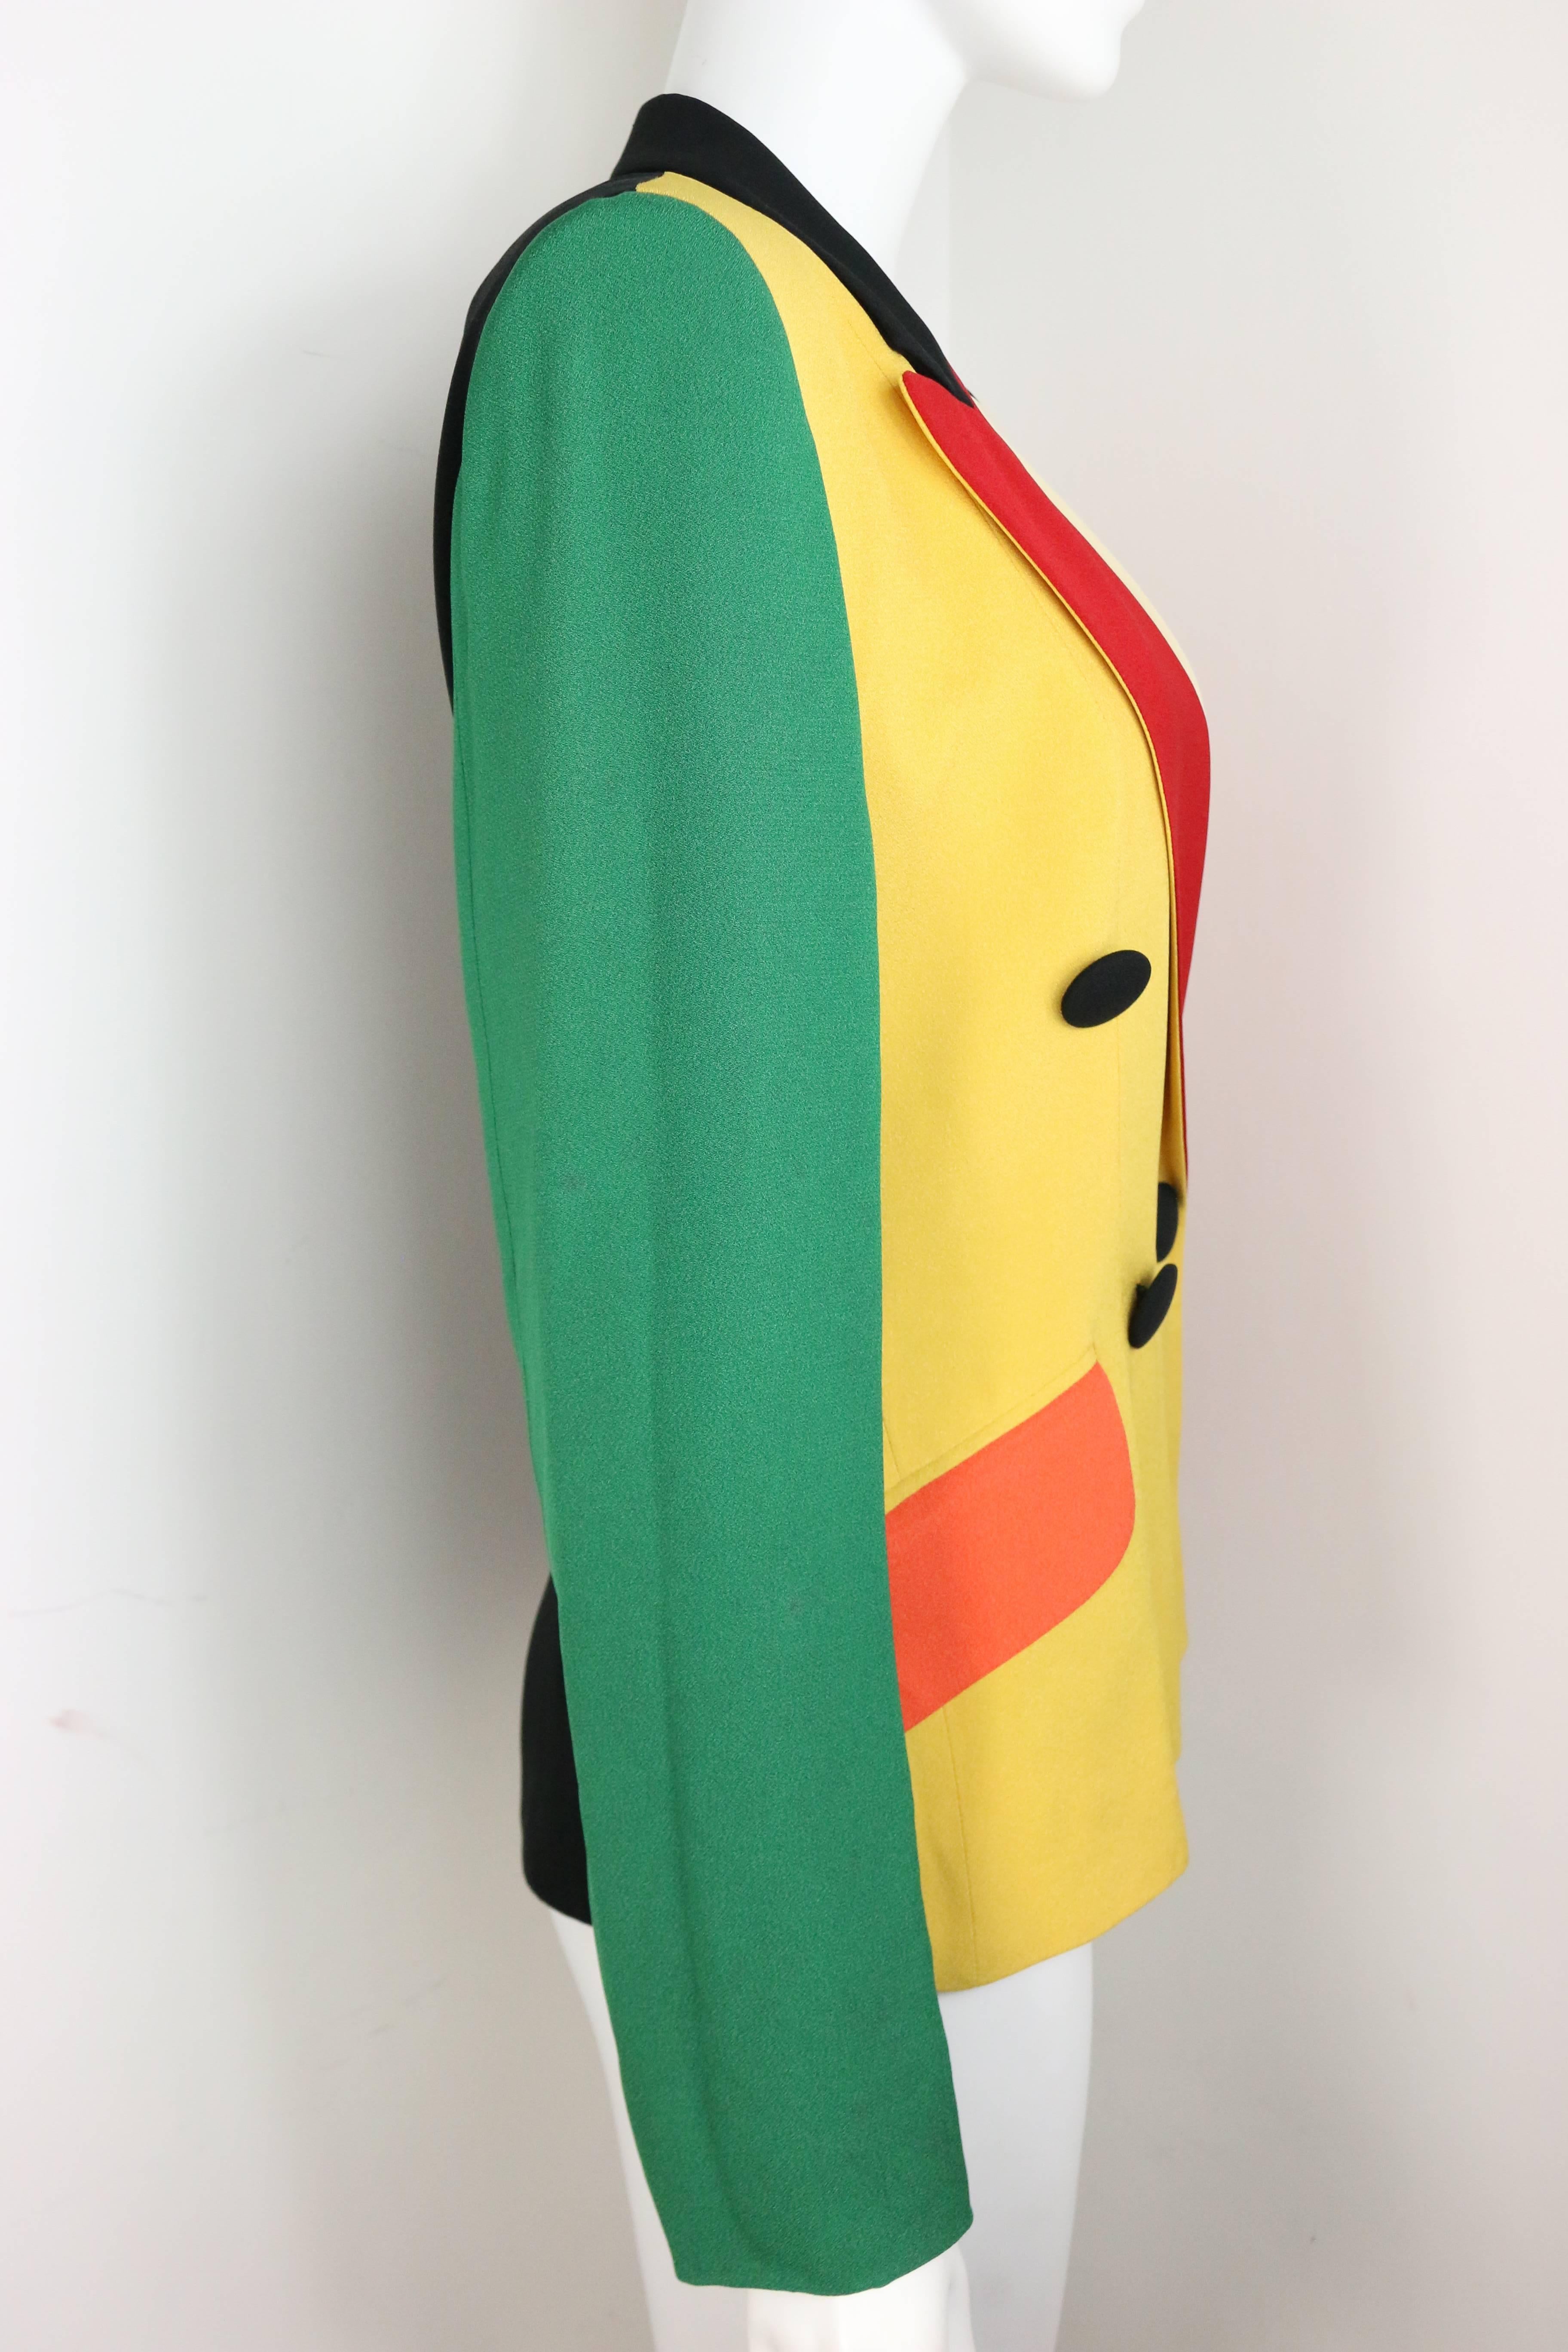 - Vintage 90s Moschino cheap and chic colour blocked (cream, black, red, orange, yellow and forest green) double breasted jacket. This is a one of a kind jacket with playful and fun Moschino's signature. 

- Featuring two flaps pockets in colour